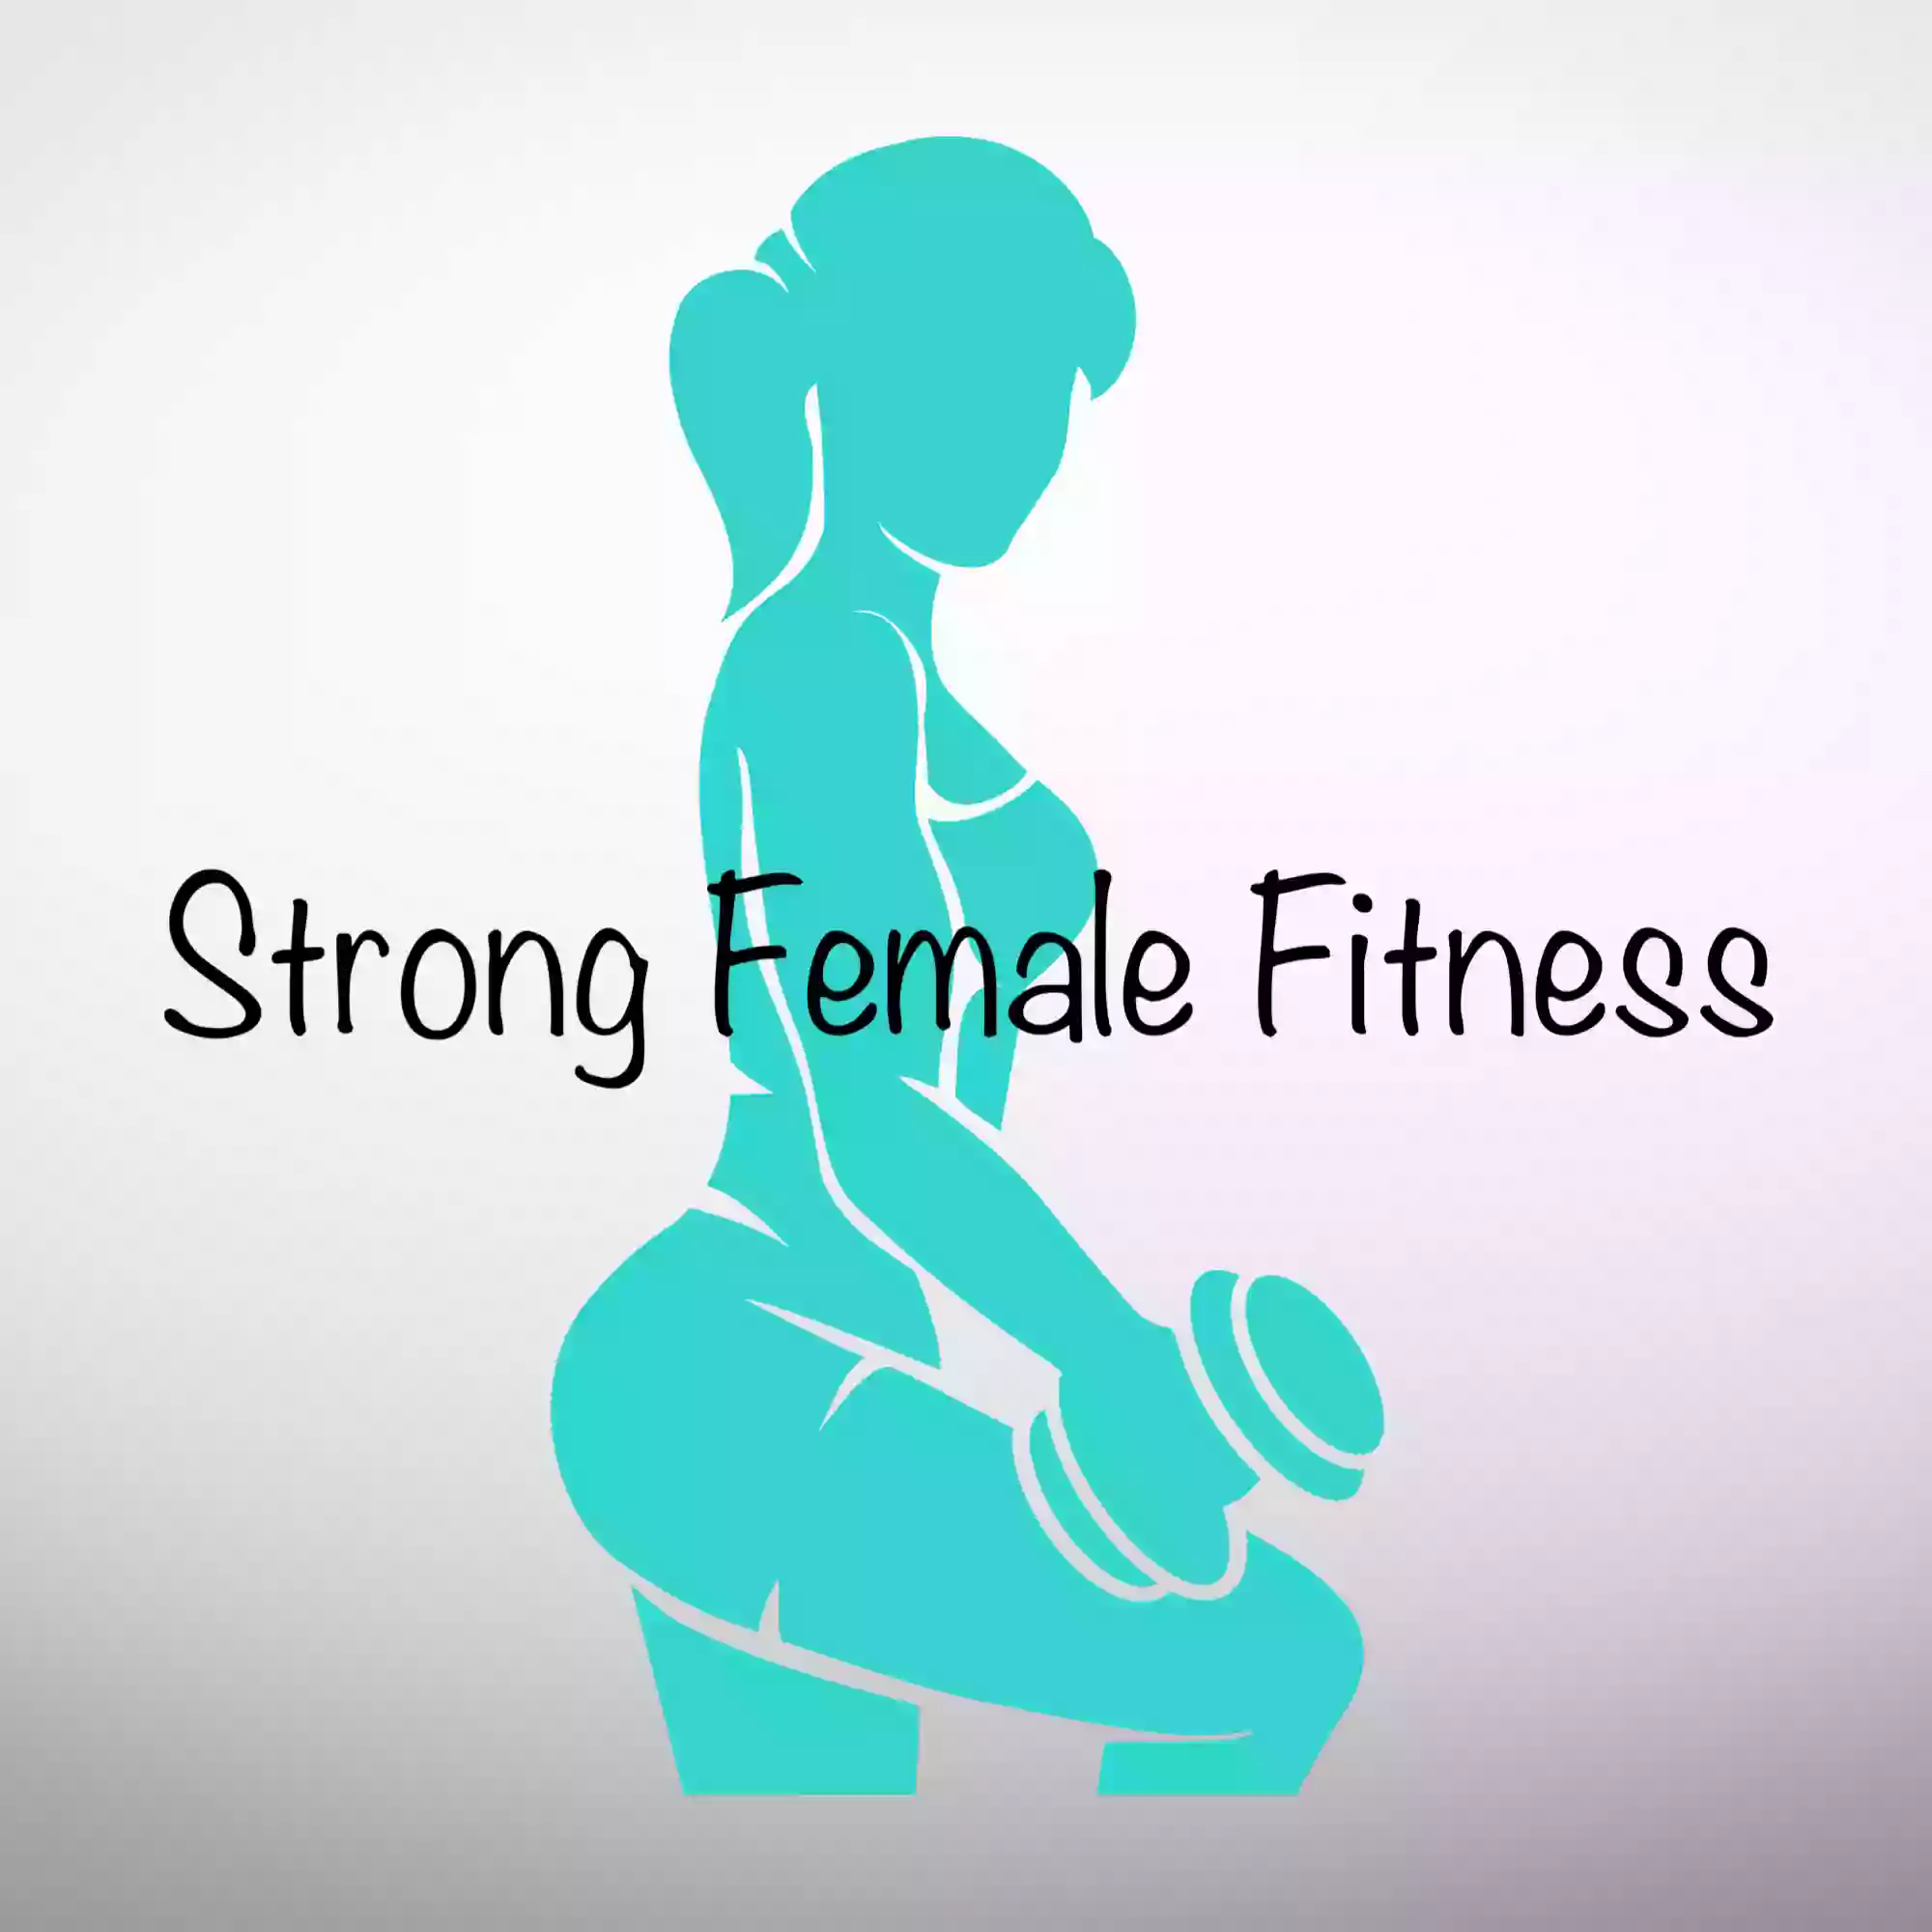 Strong Female Fitness